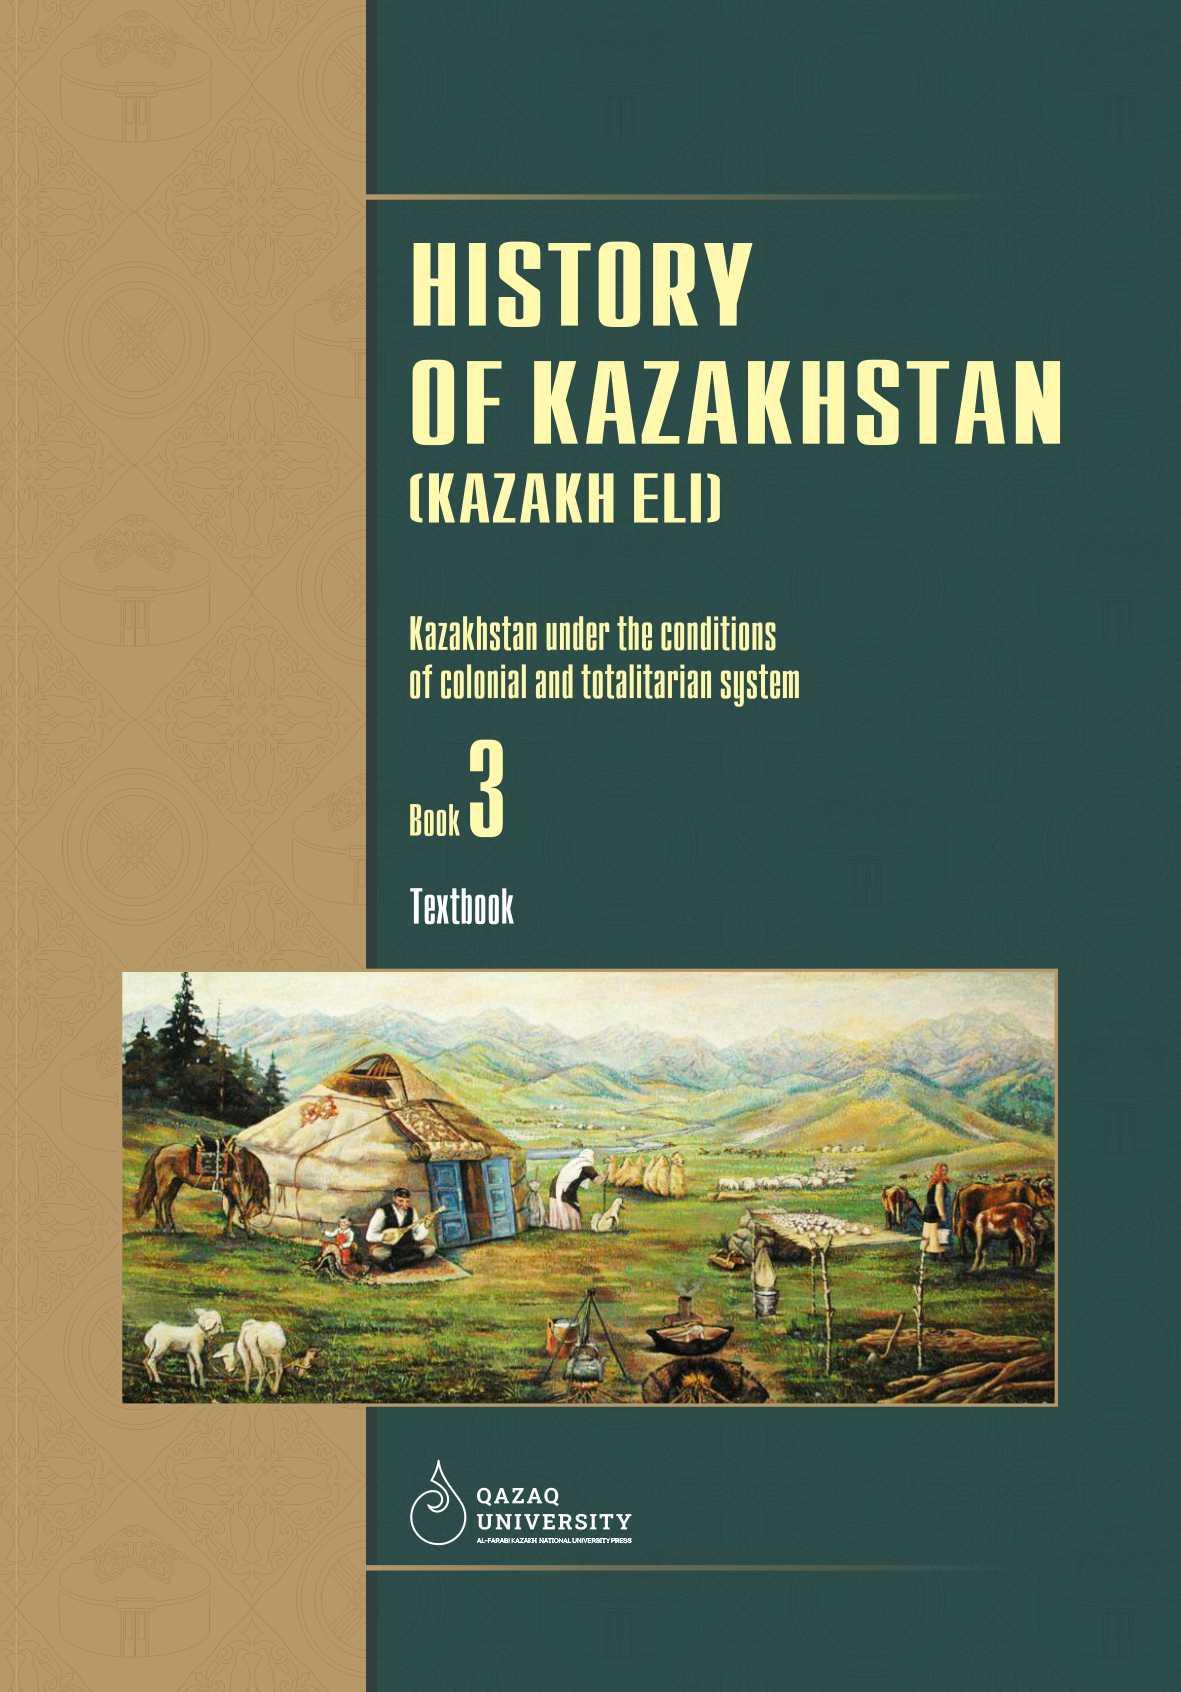 History of Kazakhstan (Kazakh Eli): a textbook of 4 volumes. Book 3: Kazakhstan under the conditions of colonial and totalitarian system – 376 p.